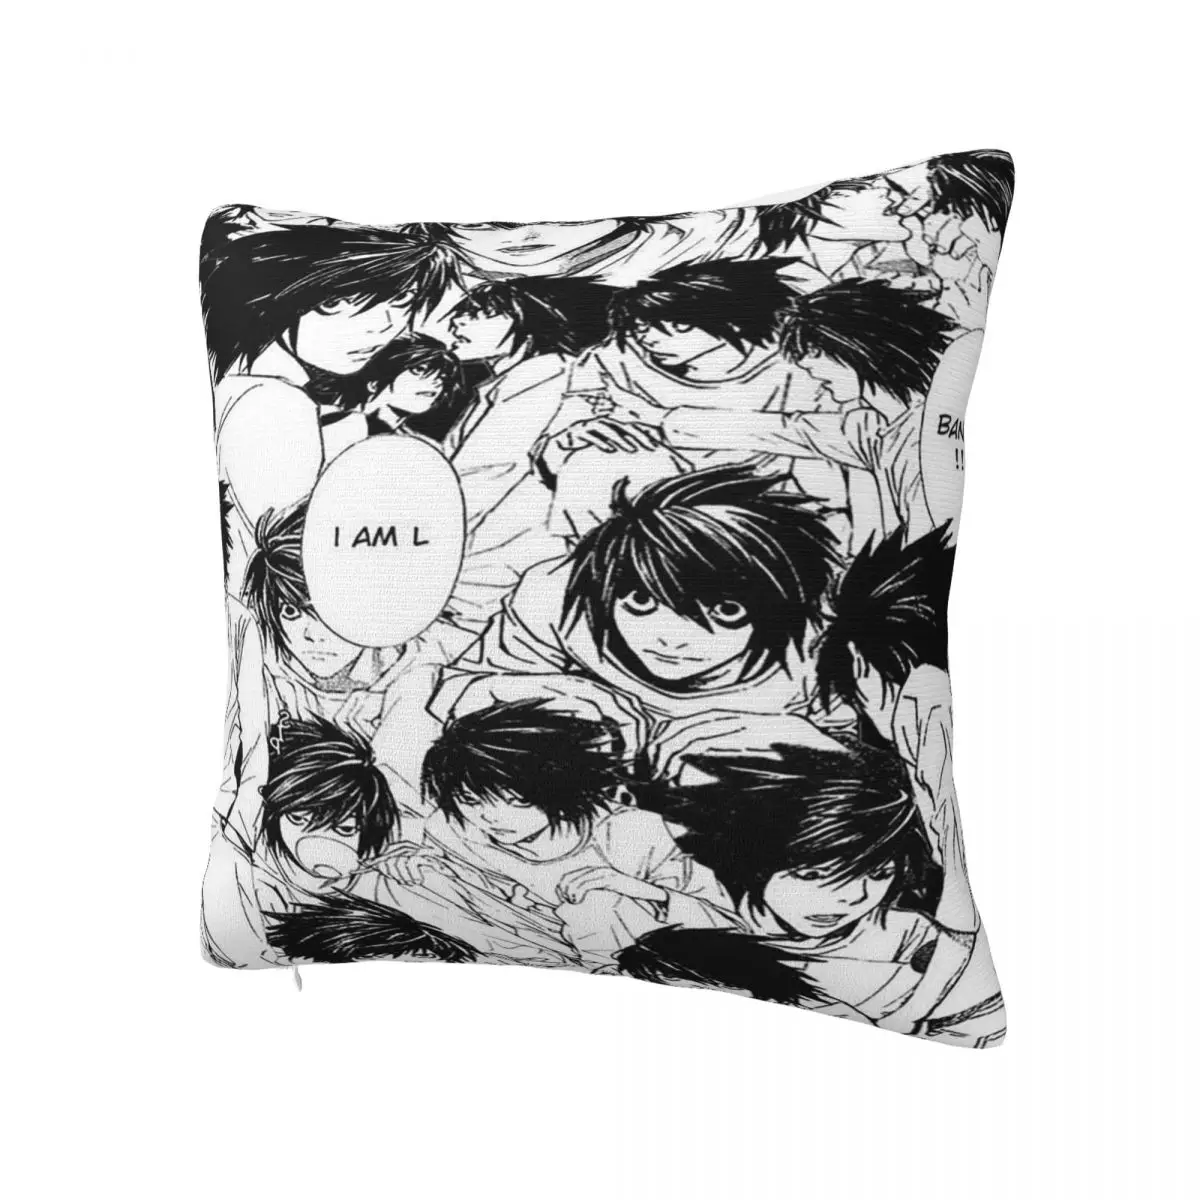 Death Note Plaid Anime Pillowcase Printed Polyester Cushion Cover Decorative Lawliet Collage Pillow Case Cover Home 45X45cm